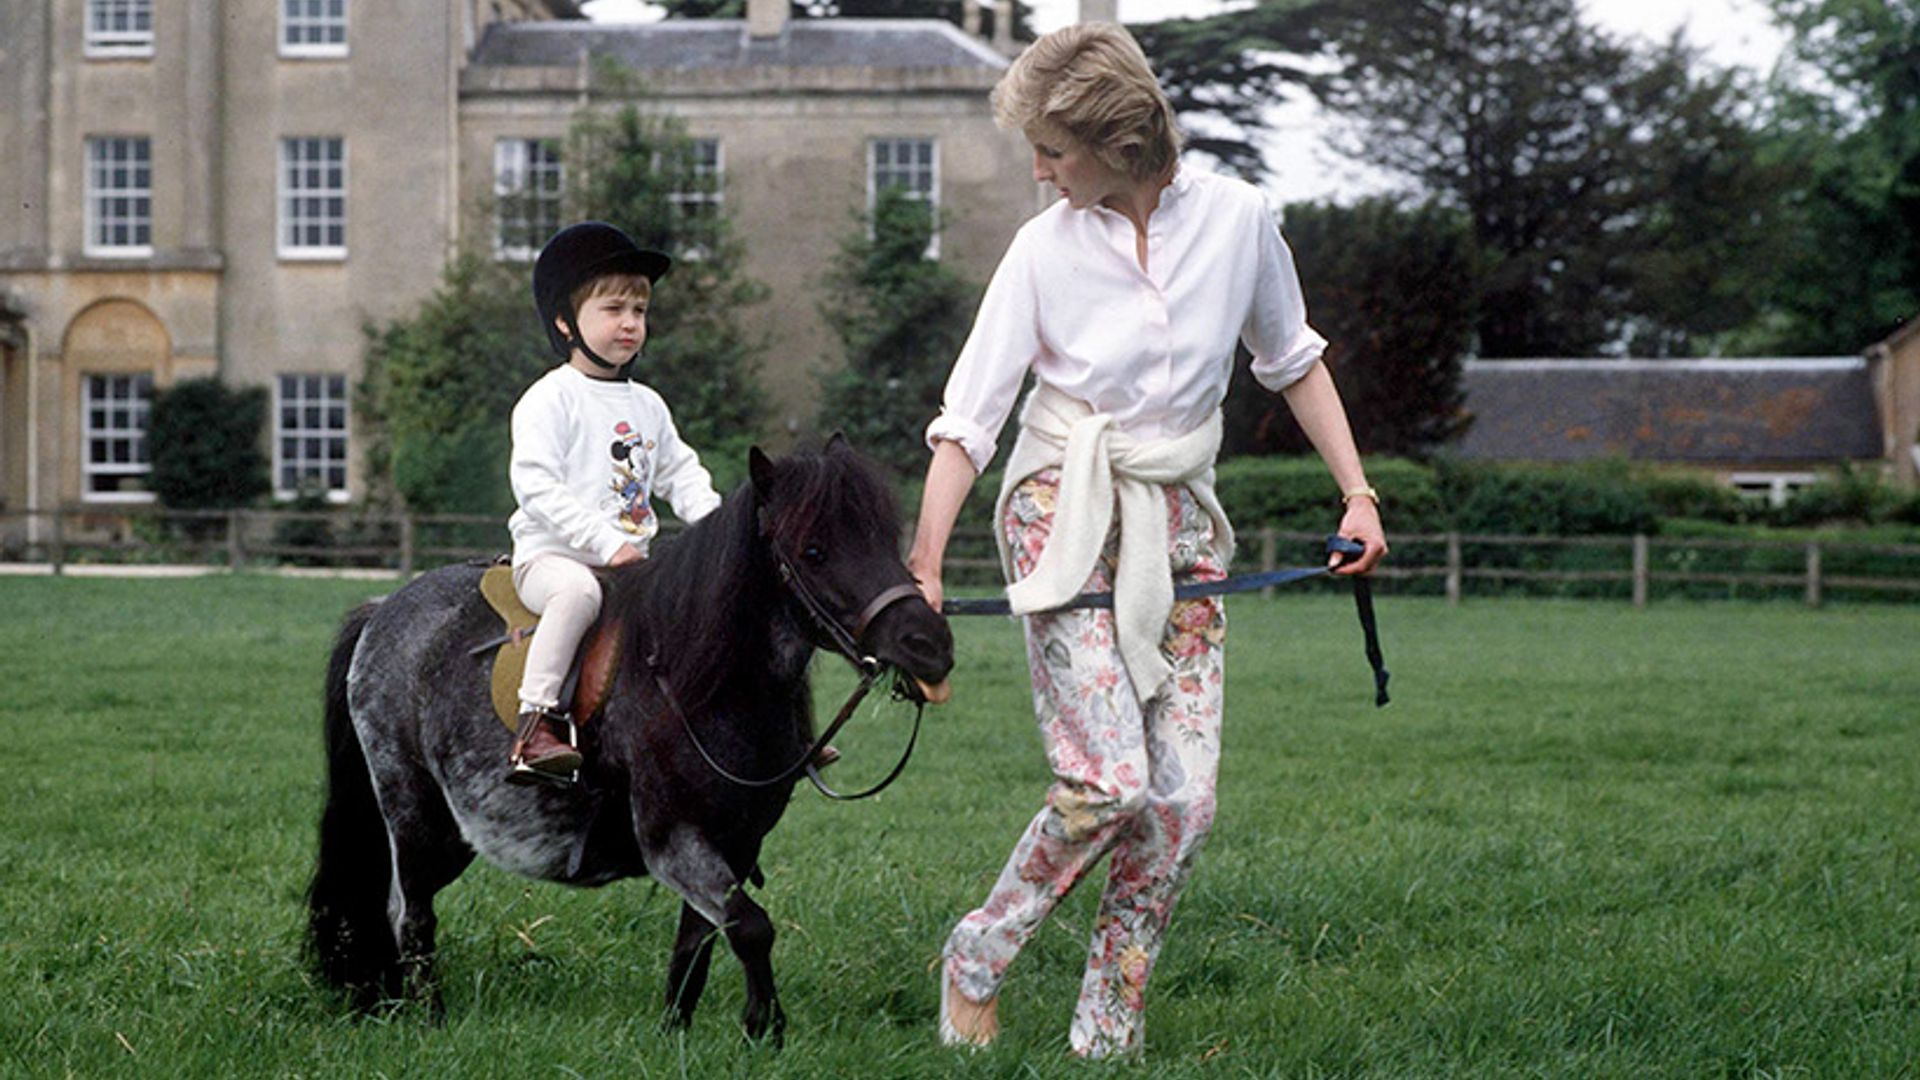 See which young royal has been pictured horse riding for the first time